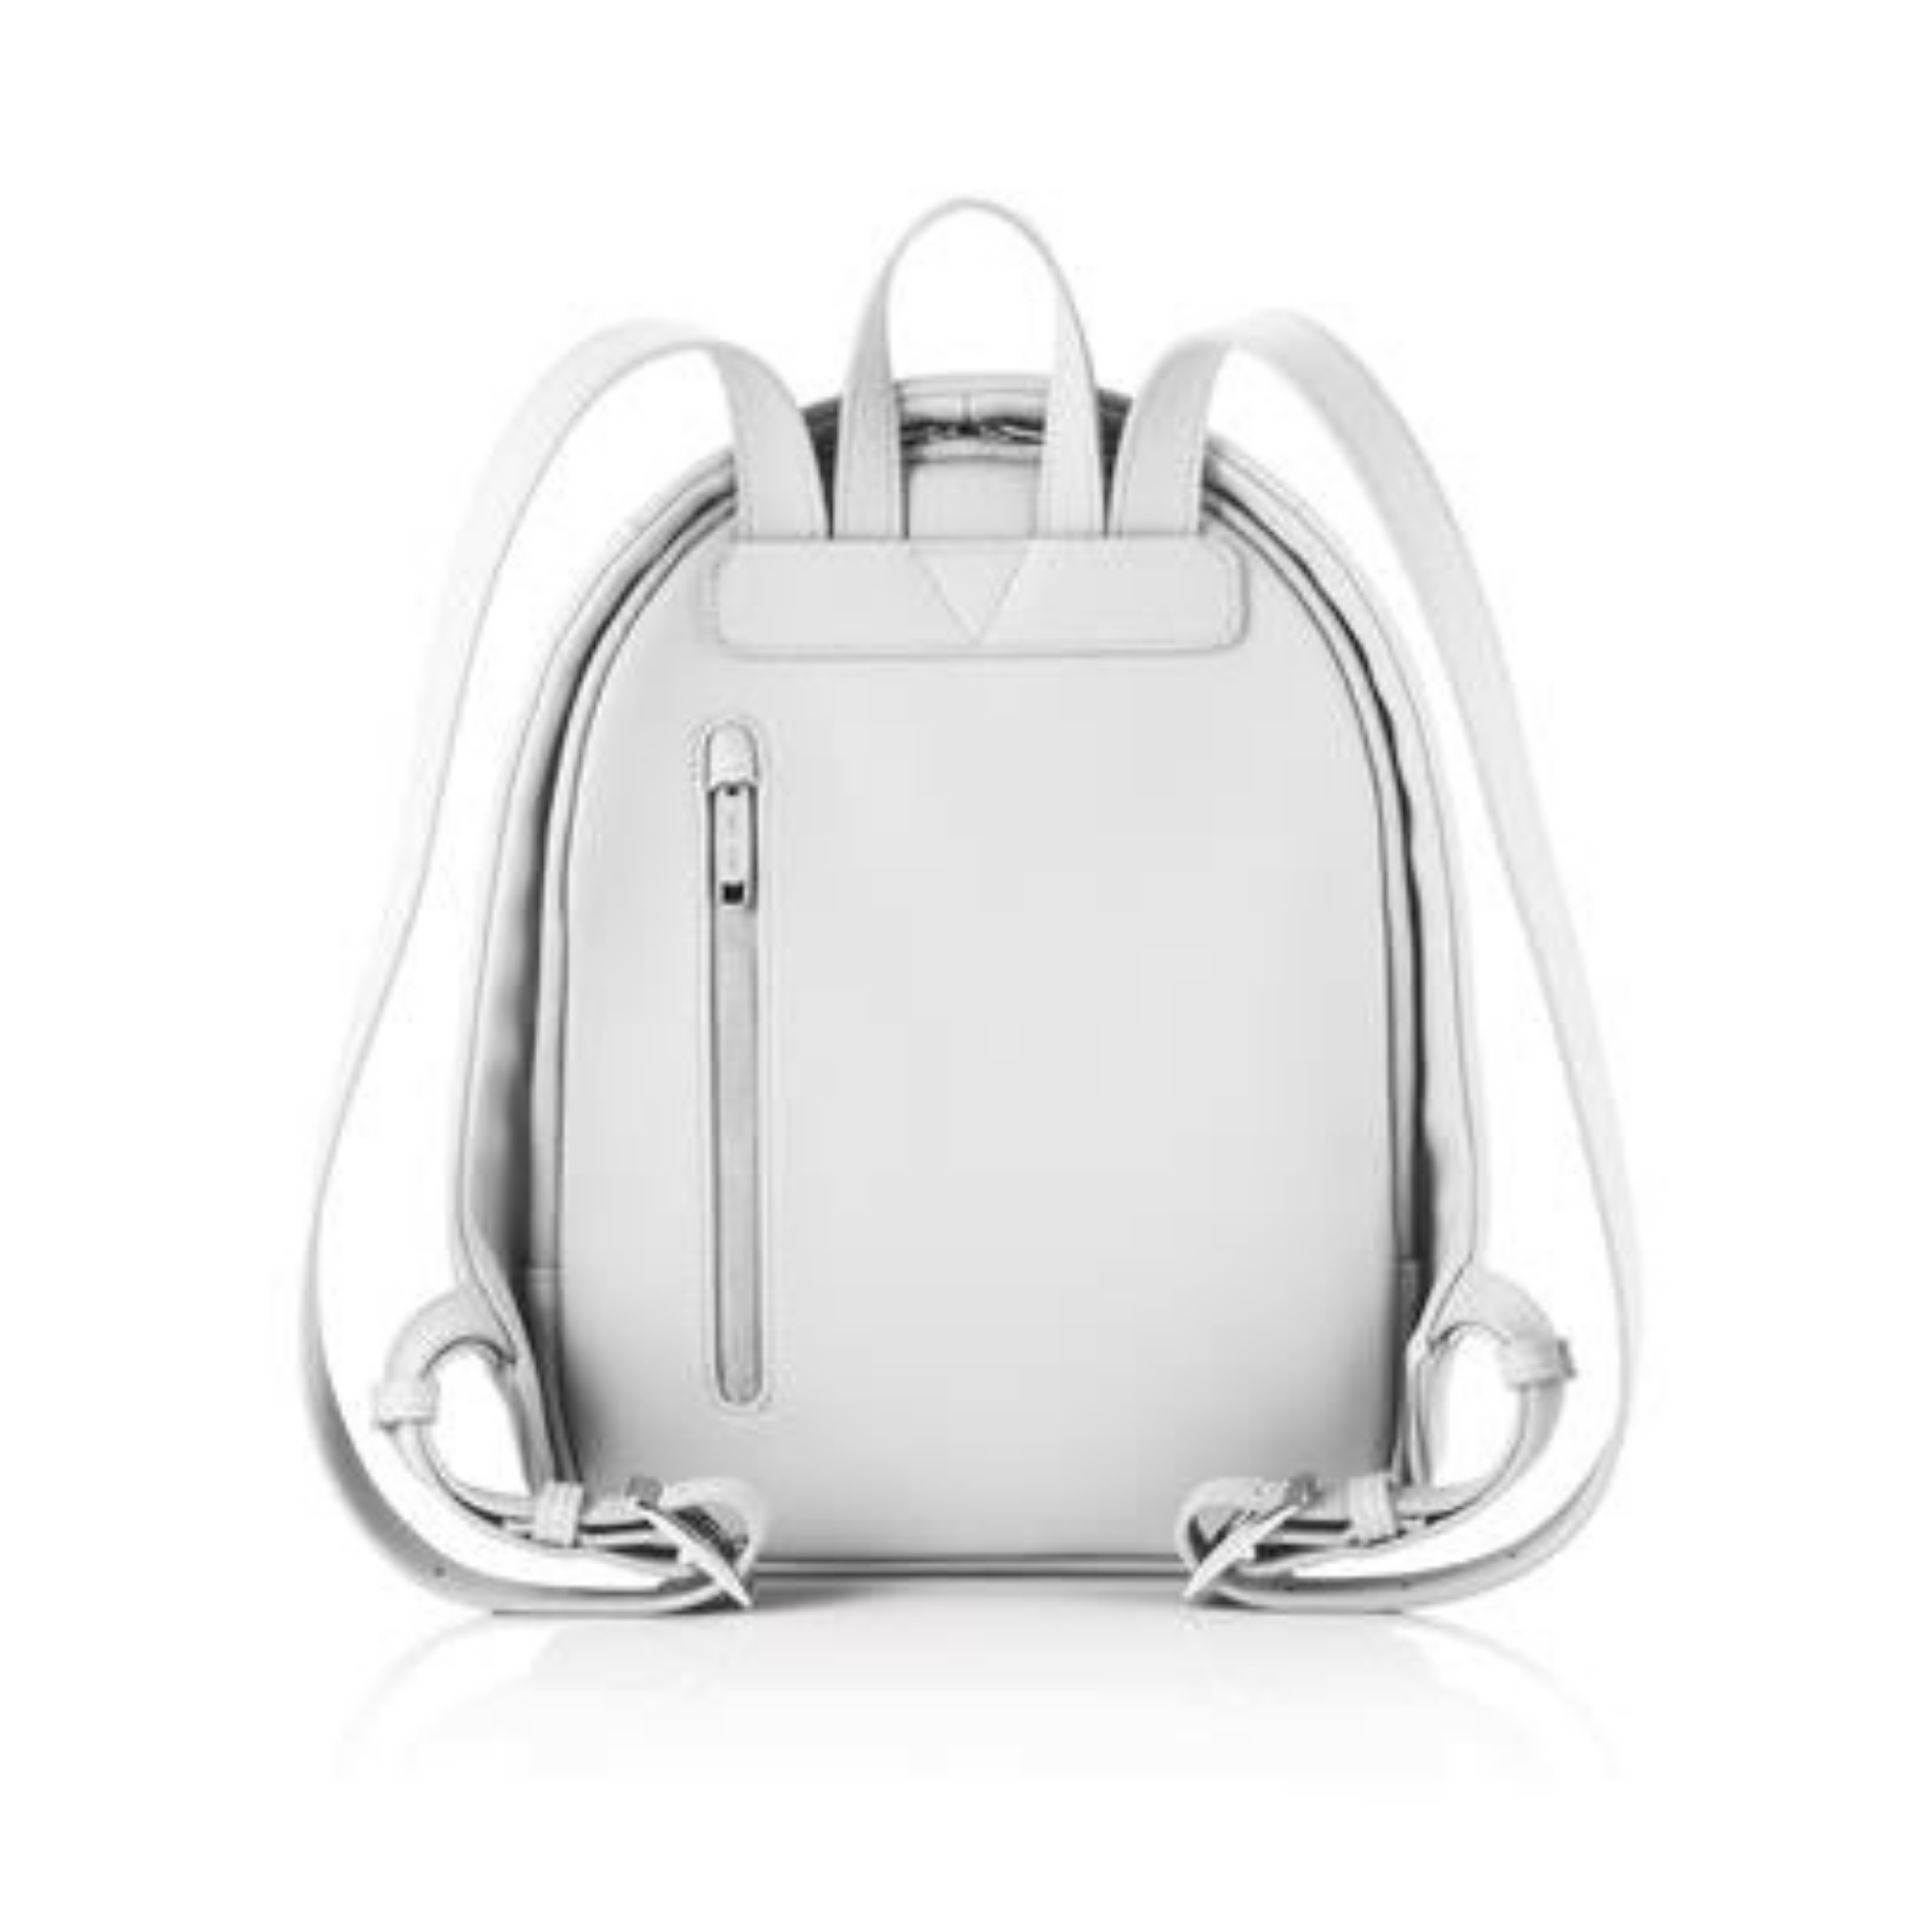 XDDESIGN BOBBY HERO Anti-theft Backpack in rPET material